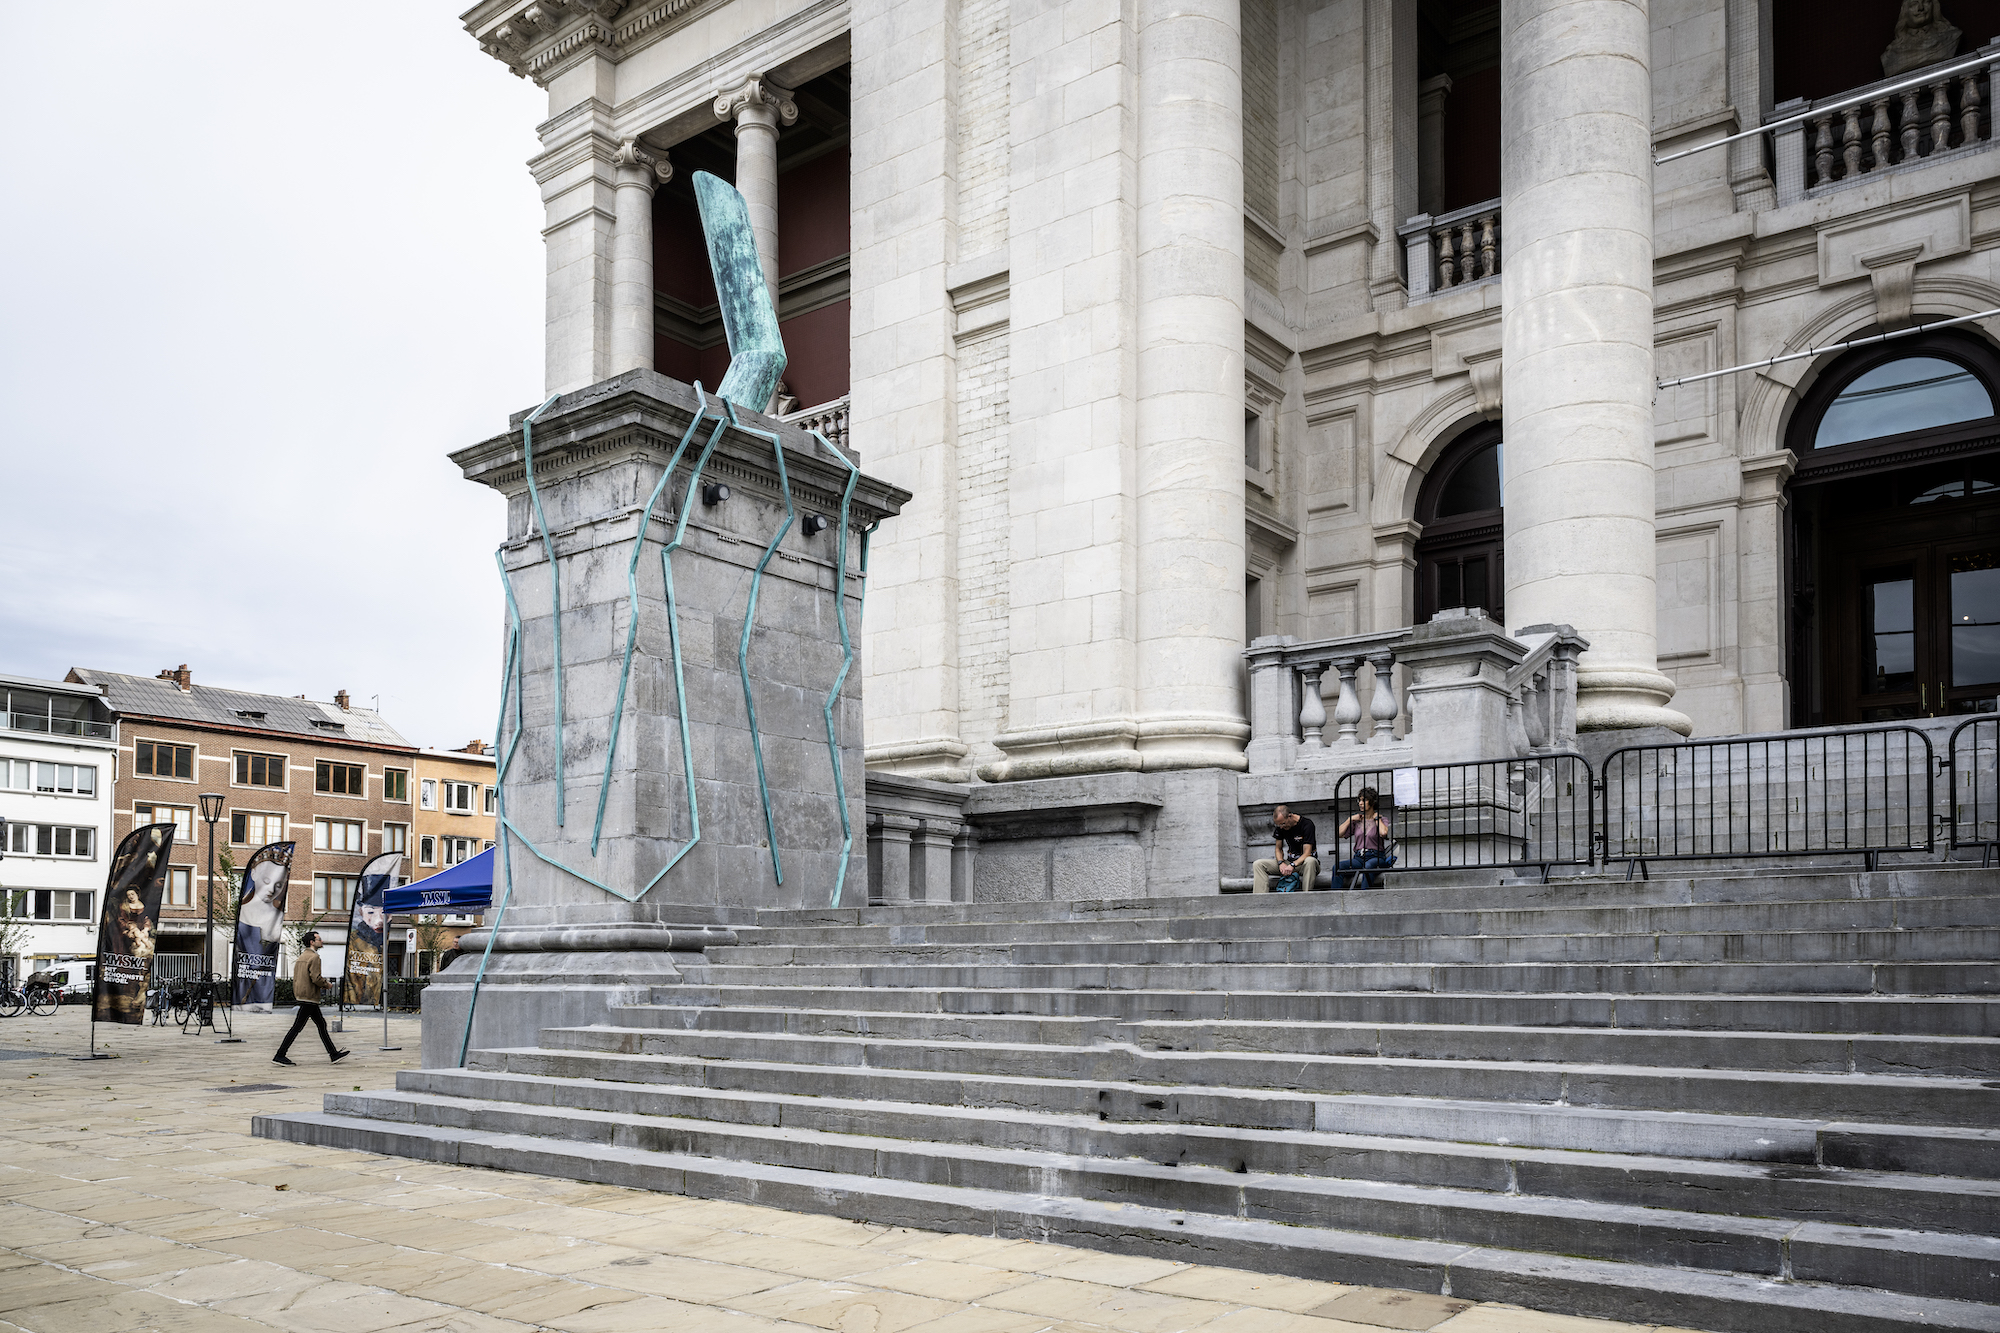 There are steps next to a monumental sculpture leading up to a large museum with giant columns